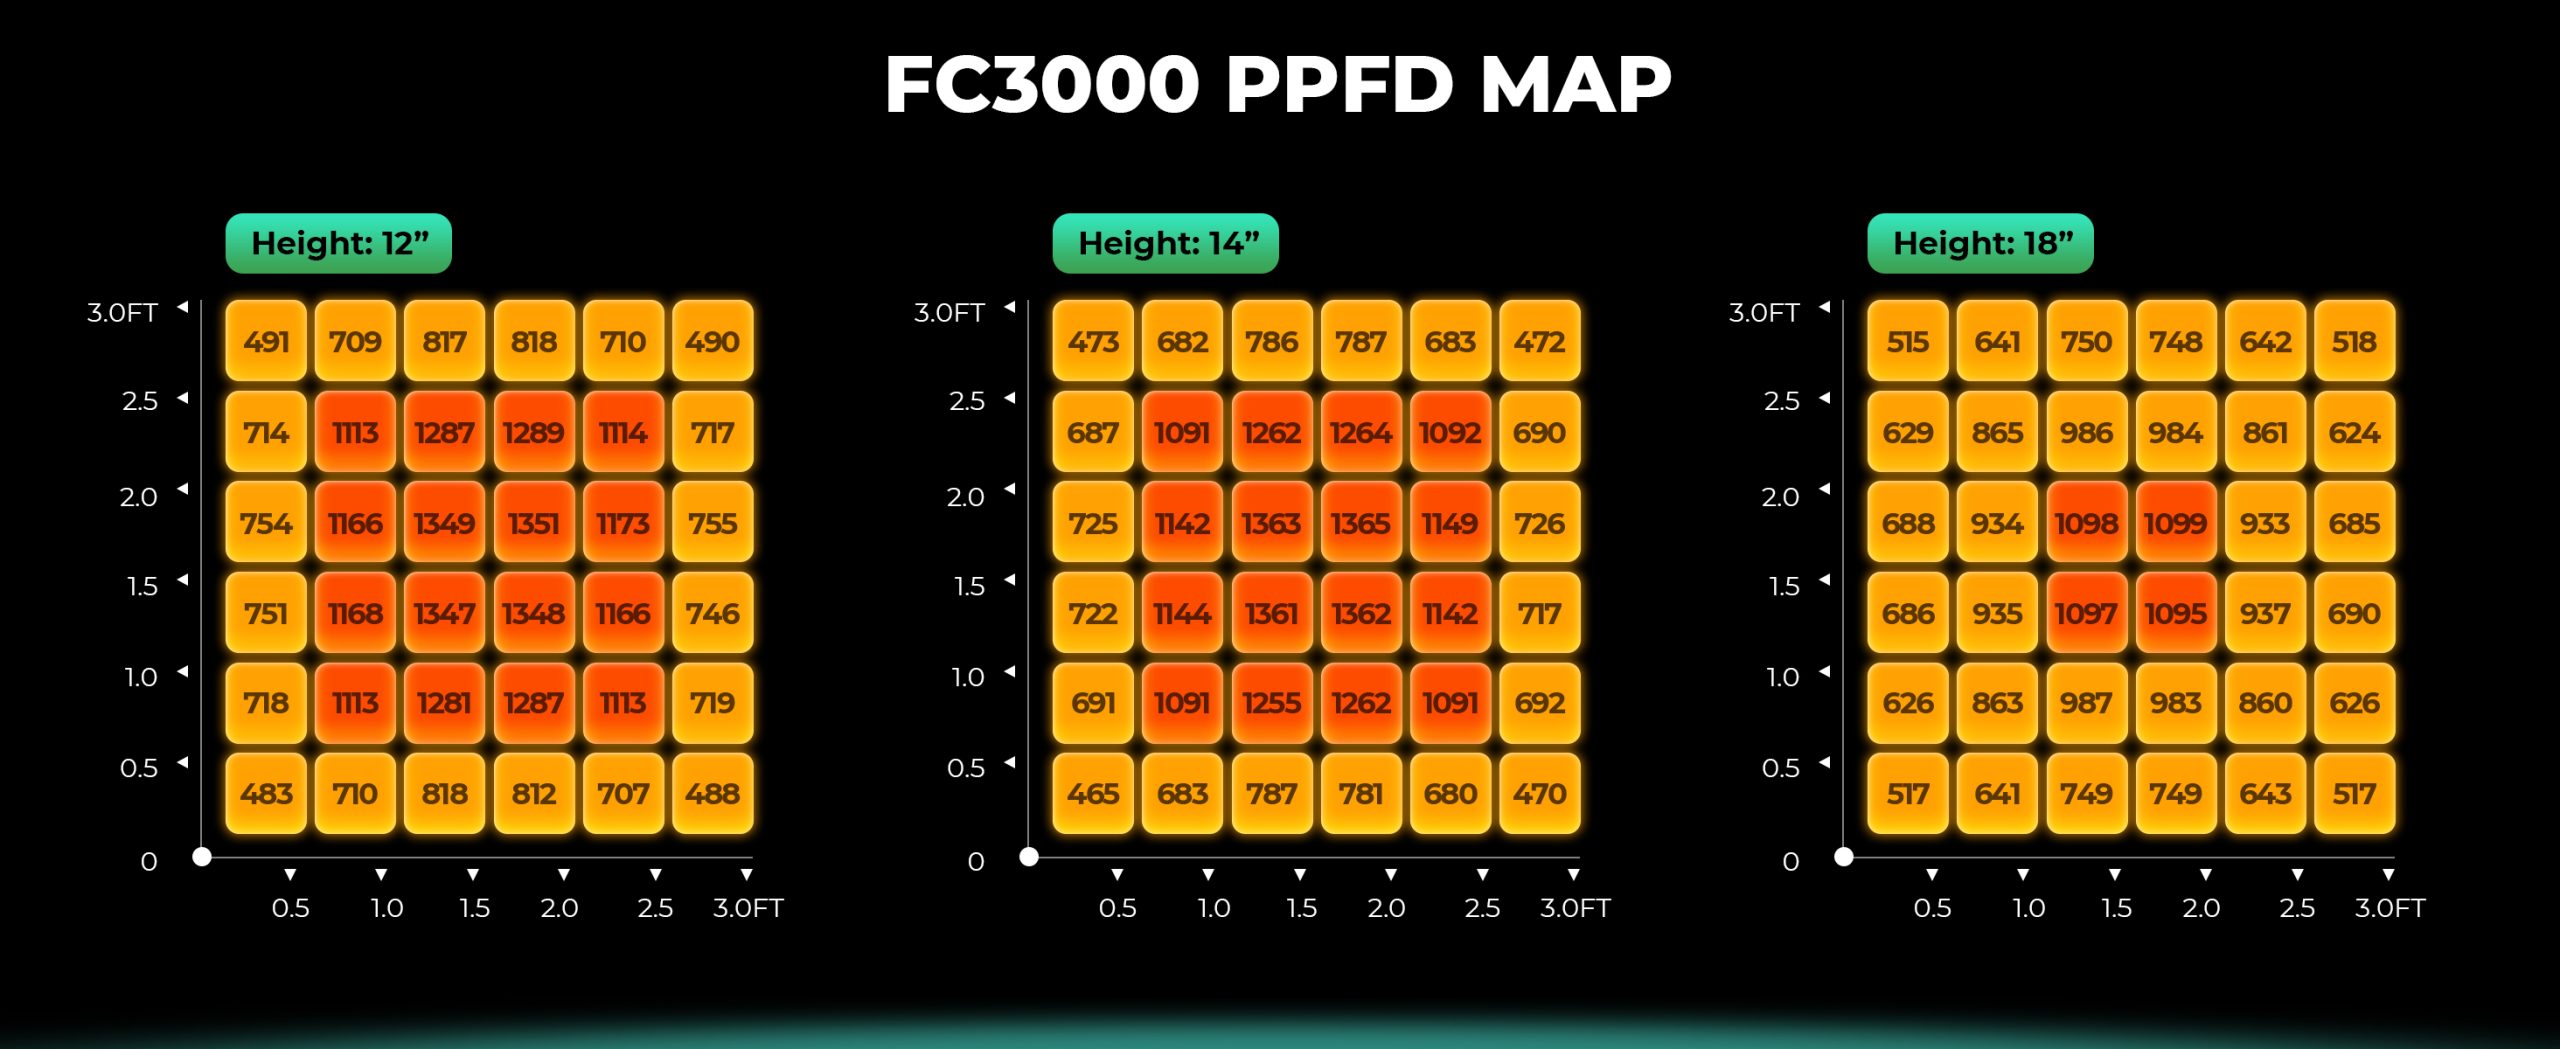 High and Uniform PPFD of FC3000